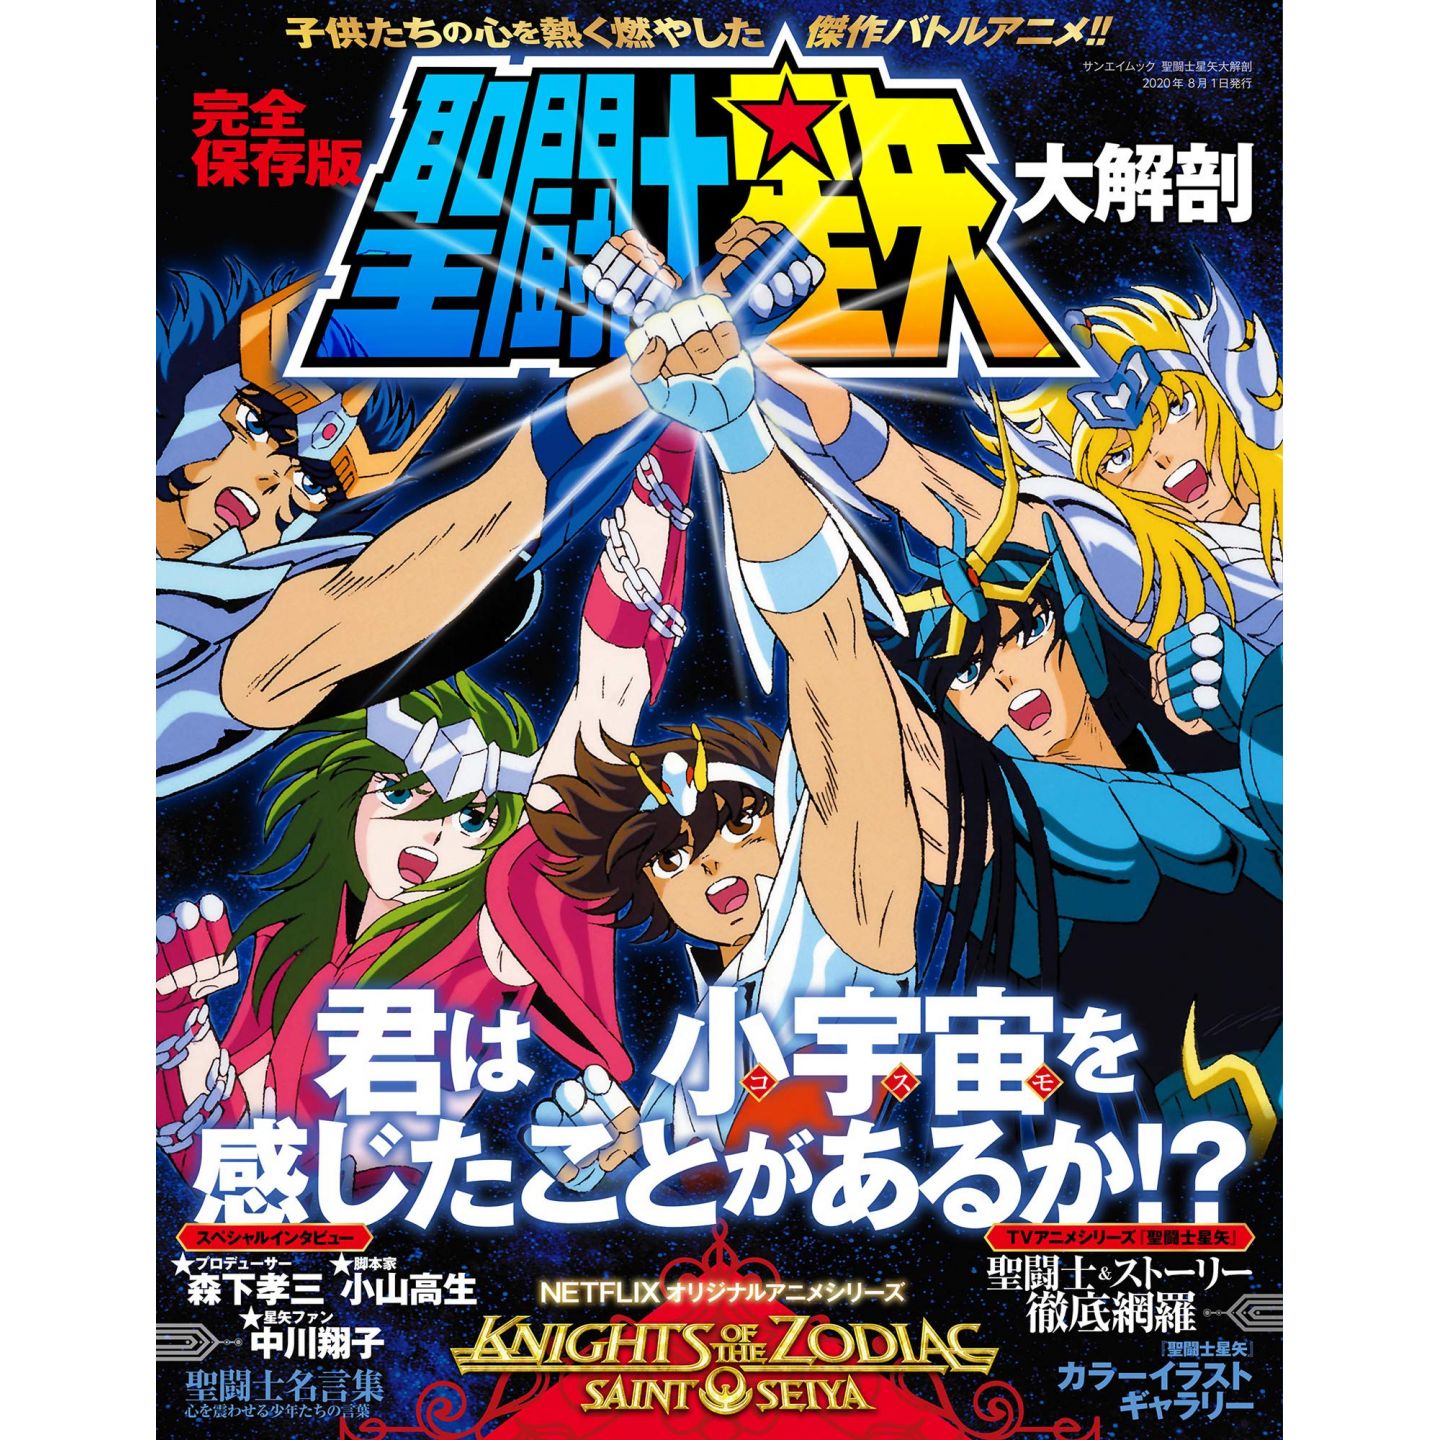 Saint Seiya Omega Picture - Image Abyss